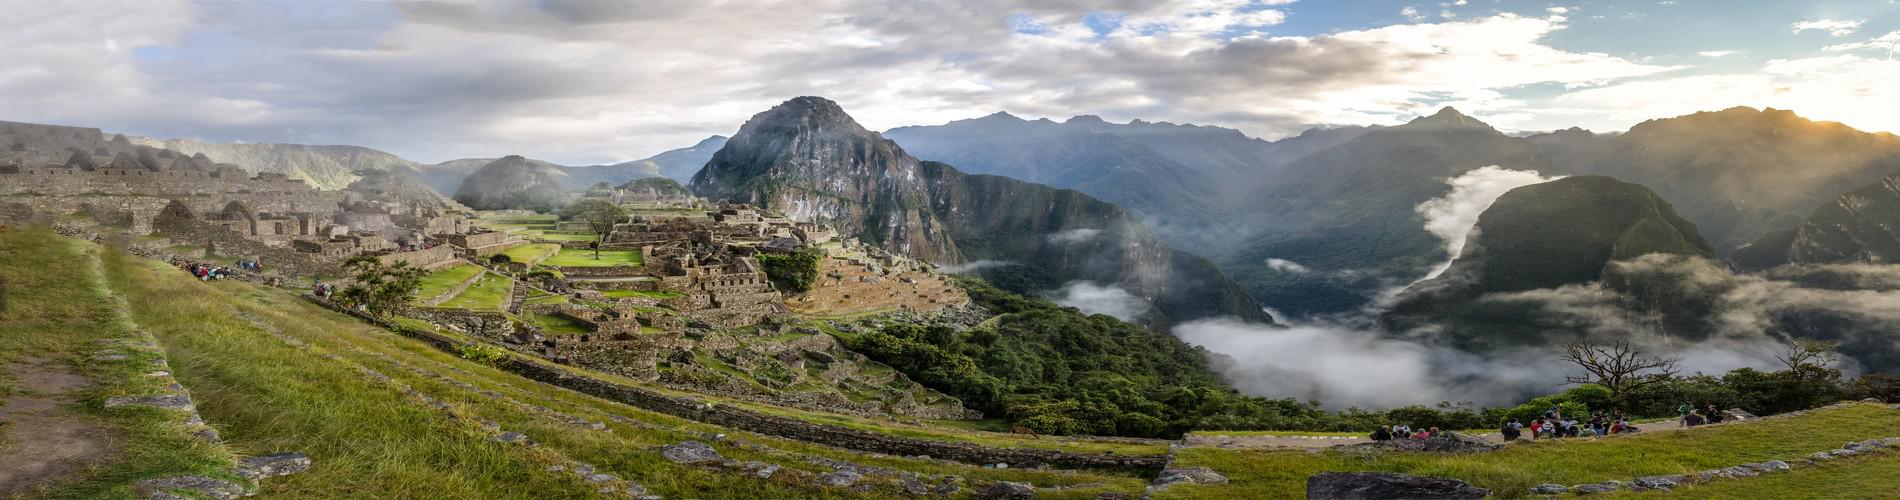 What To See in Peru in 7 Days?